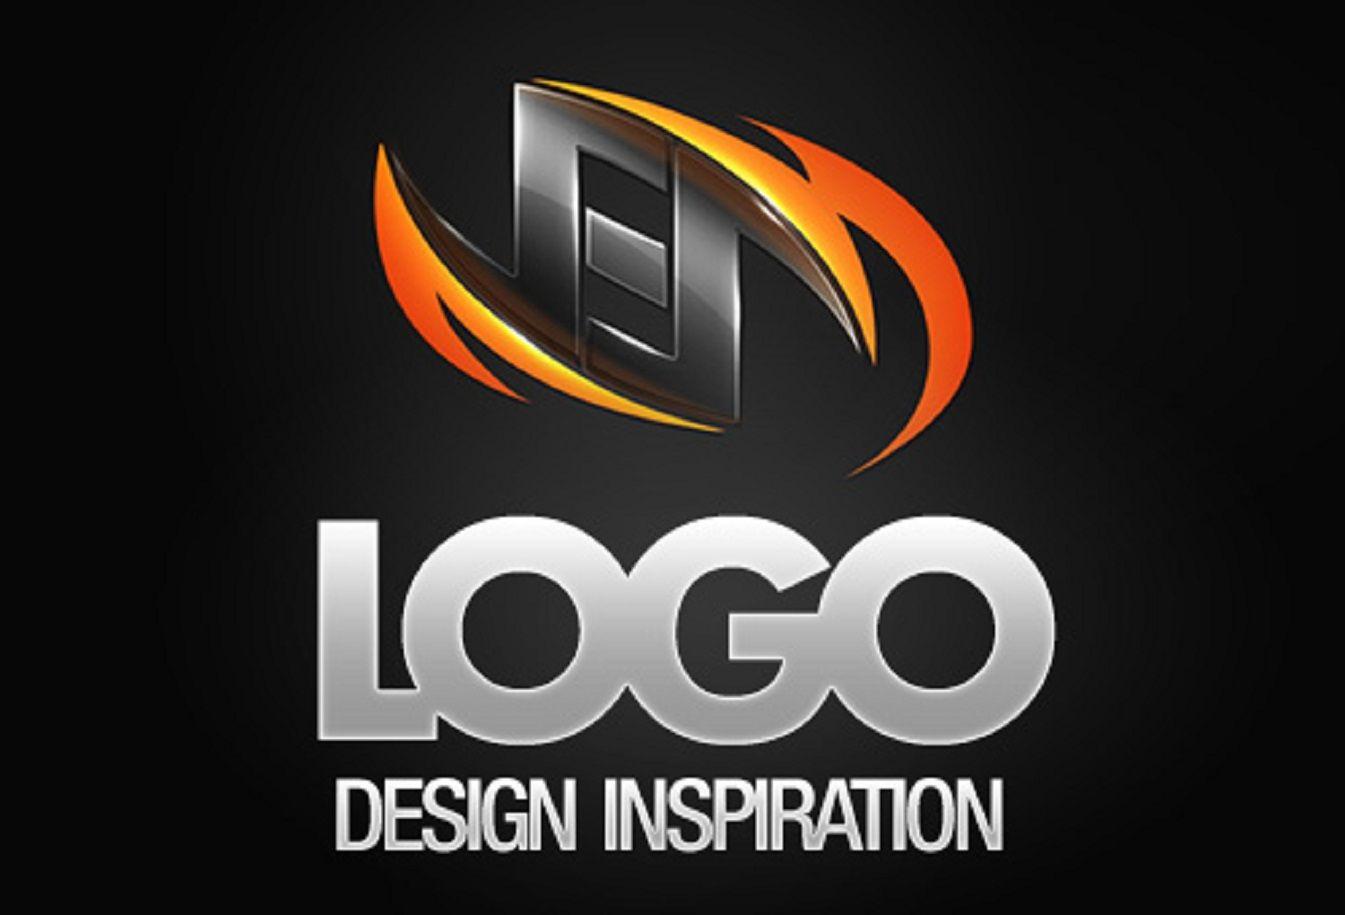 Awesome Logo - I will design 2 AWESOME and Professional logo design Concepts